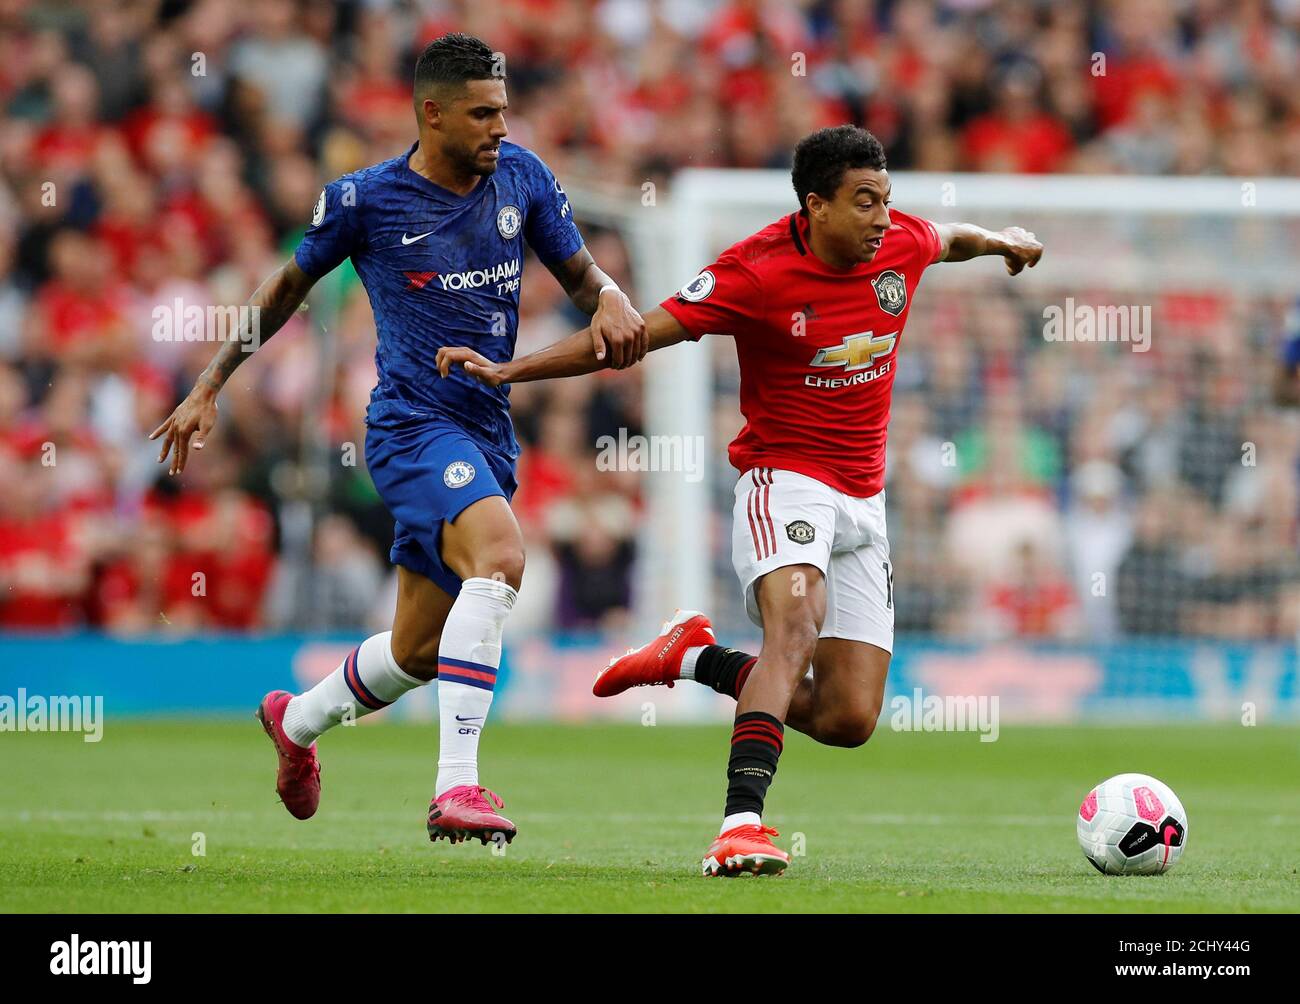 Soccer Football - Premier League - Manchester United v Chelsea - Old Trafford, Manchester, Britain - August 11, 2019  Chelsea's Emerson Palmieri in action with Manchester United's Jesse Lingard   REUTERS/Phil Noble  EDITORIAL USE ONLY. No use with unauthorized audio, video, data, fixture lists, club/league logos or 'live' services. Online in-match use limited to 75 images, no video emulation. No use in betting, games or single club/league/player publications.  Please contact your account representative for further details. Stock Photo